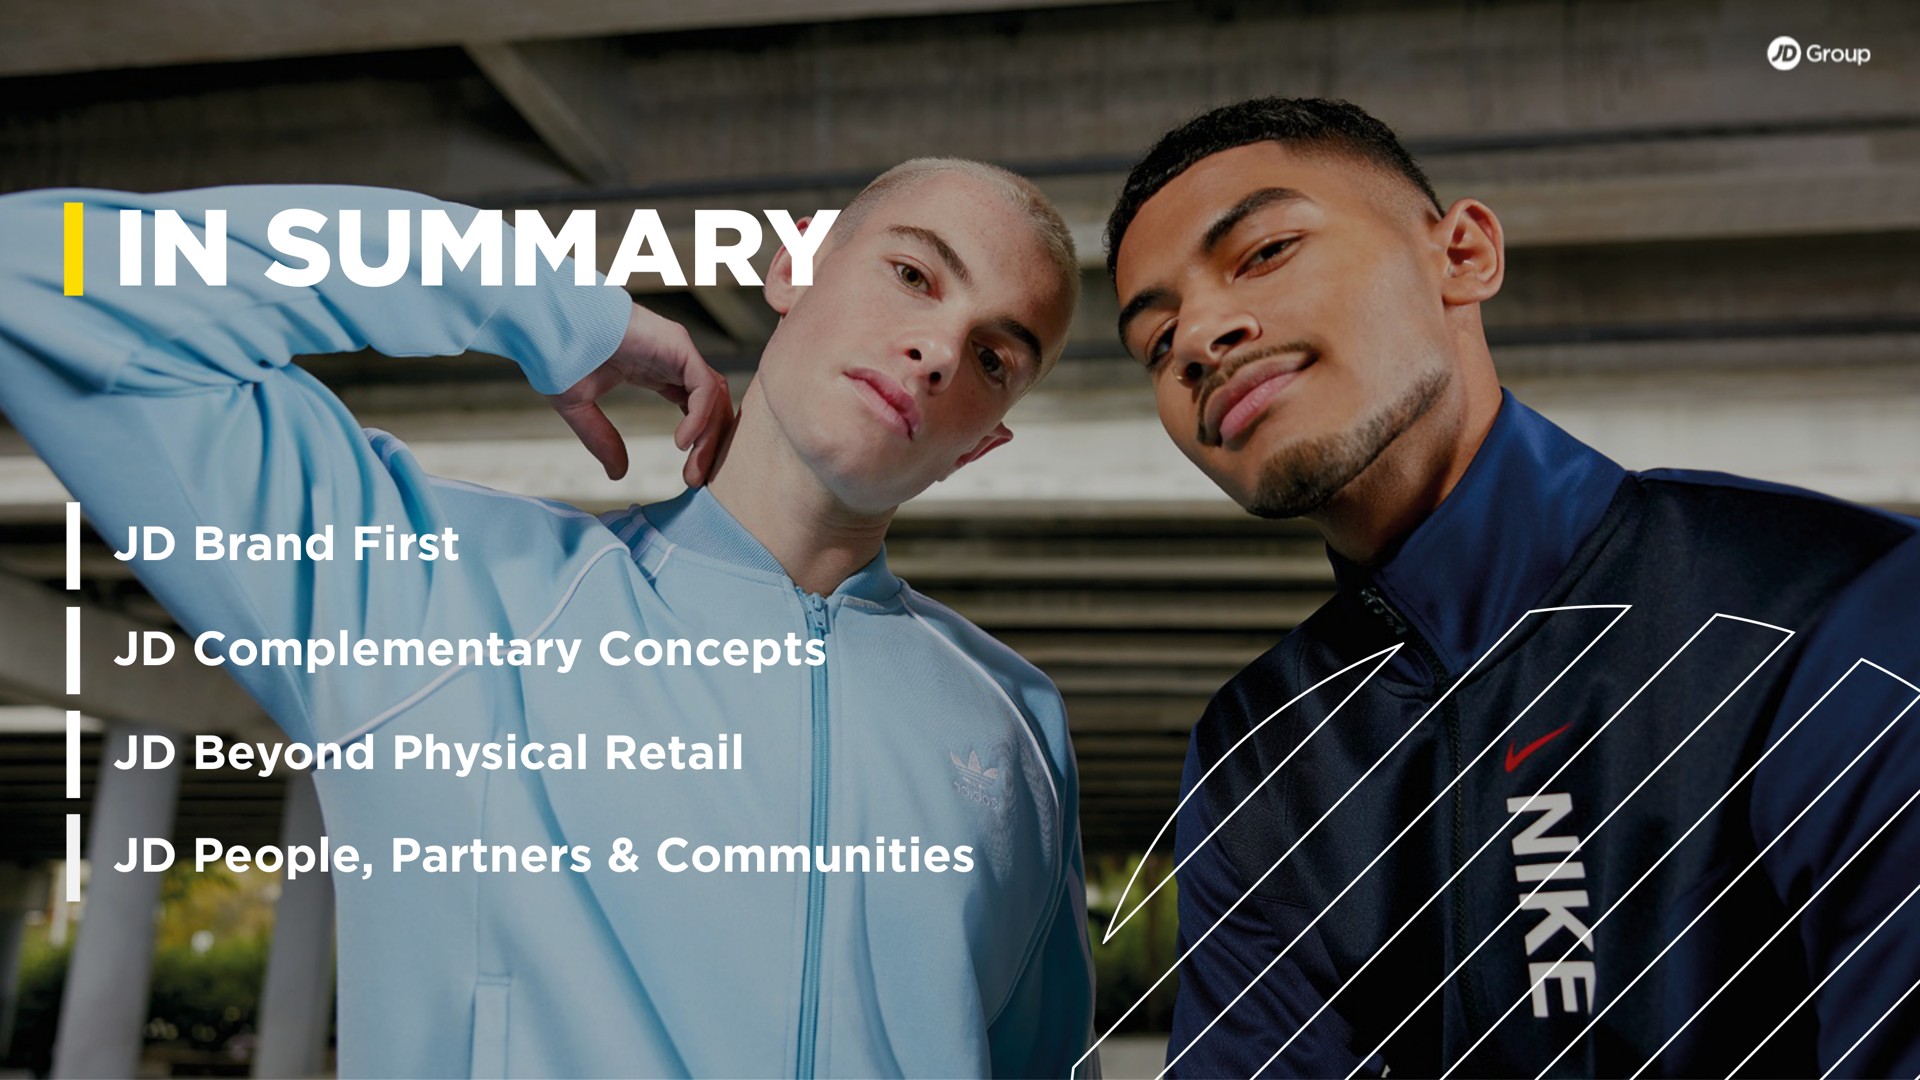 in summary brand first complementary concepts beyond physical retail people partners communities | JD Sports